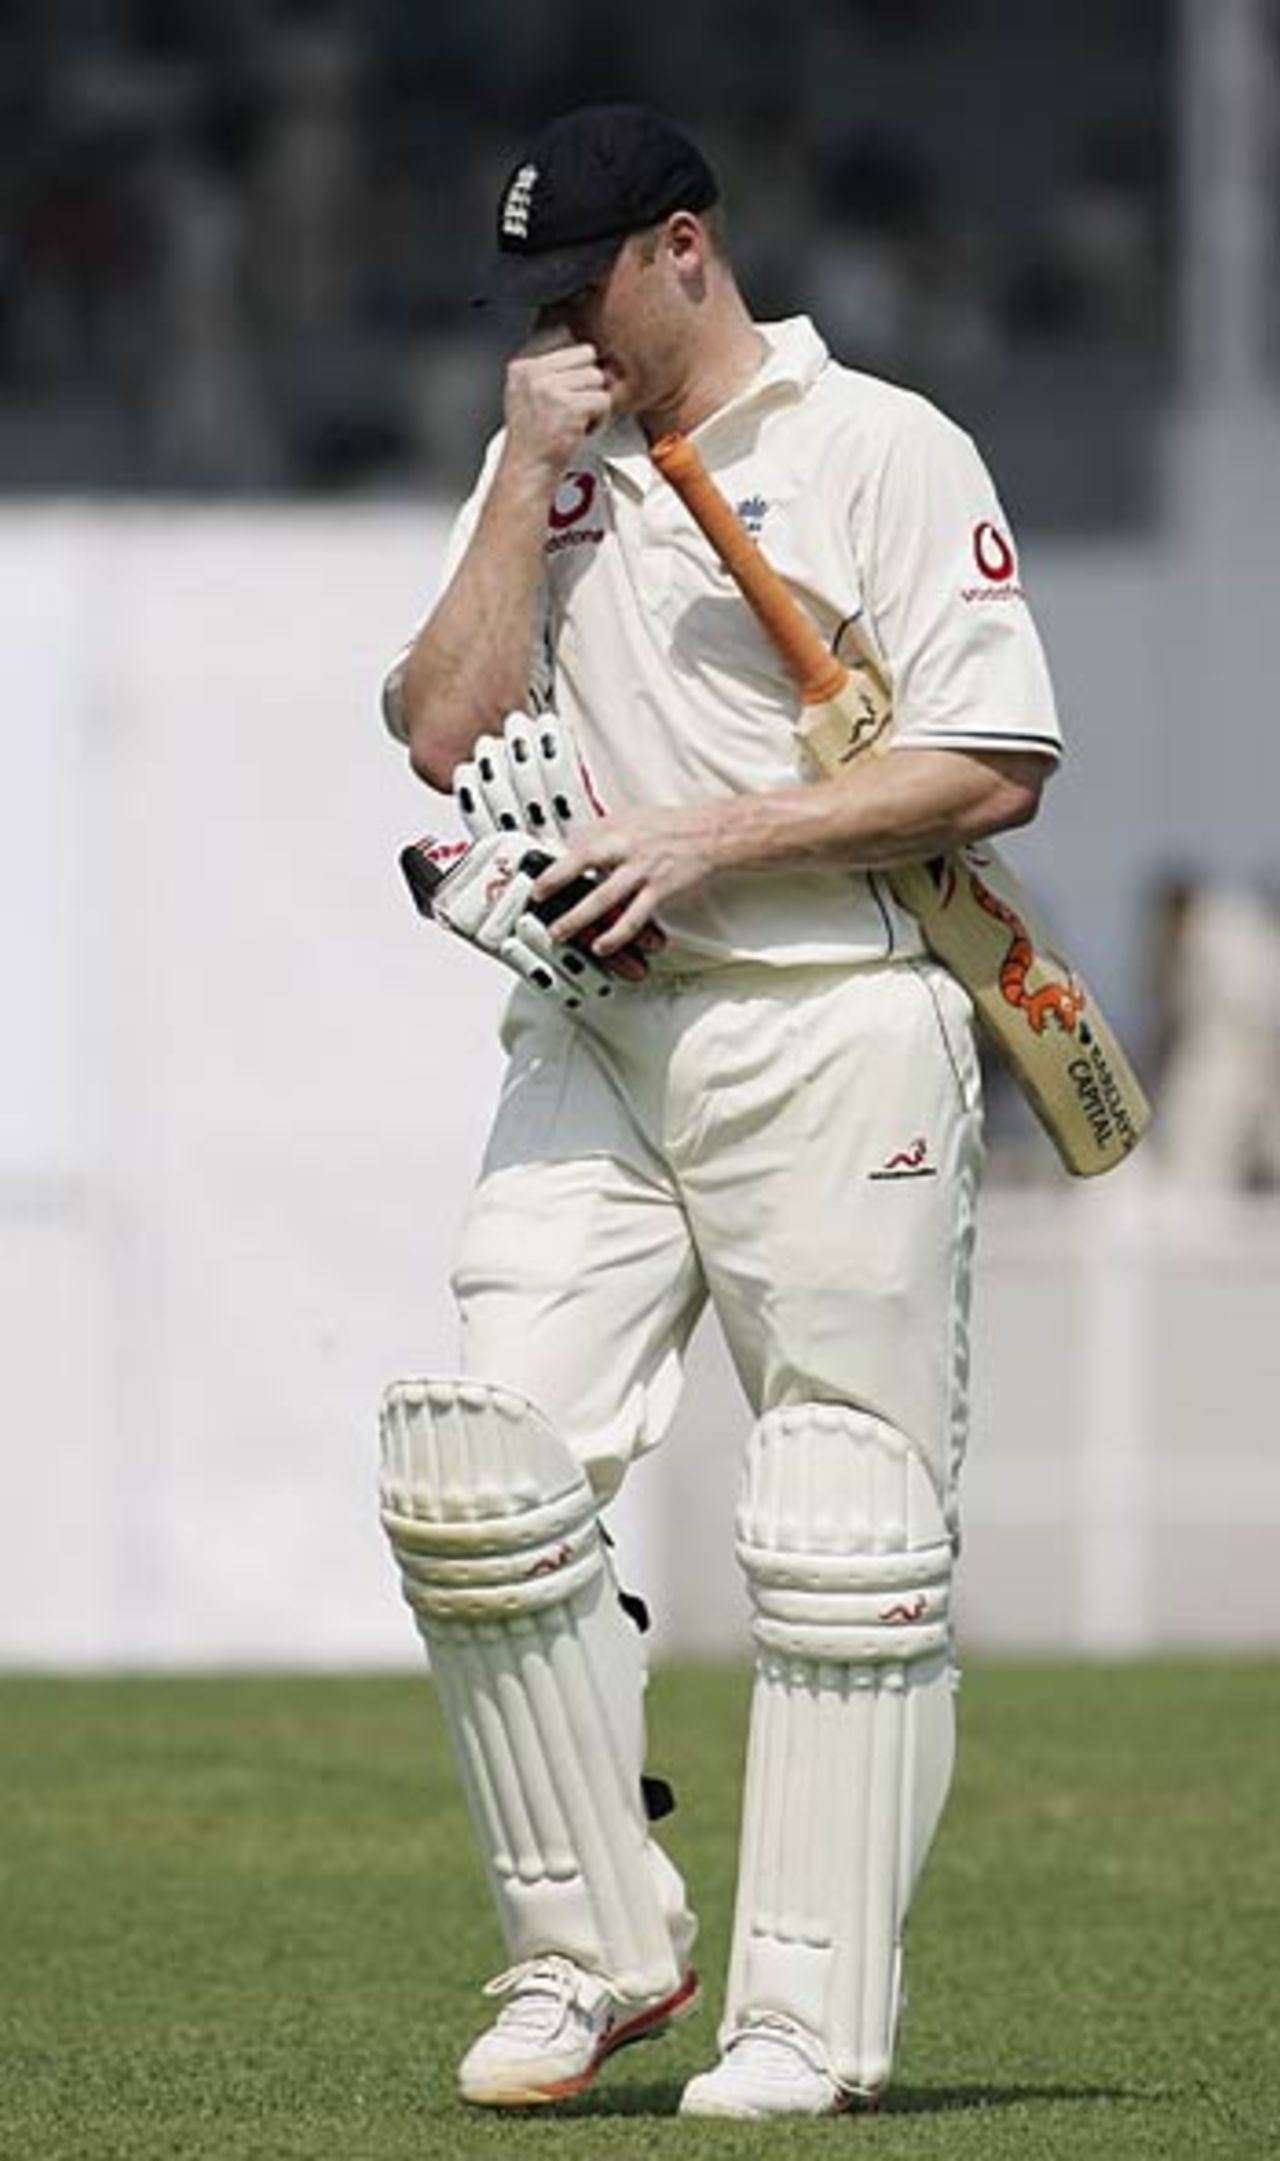 Andrew Flintoff walks back dejected - a sentiment shared by the crowd , England XI v CCI XI, tour match, Brabourne Stadium, Mumbai, February 18, 2006